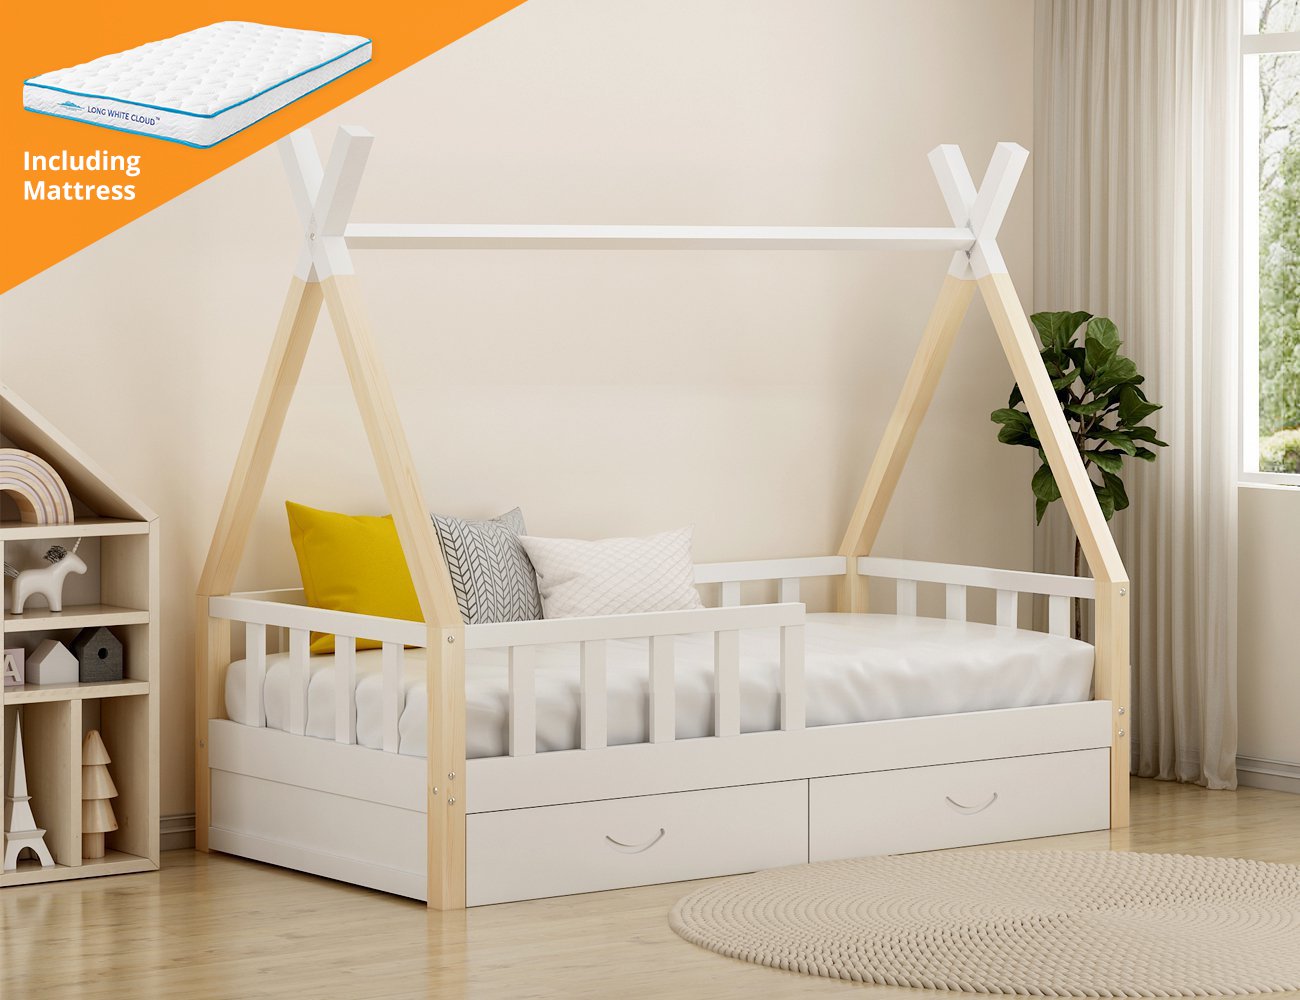 single bed frame and mattress amazon